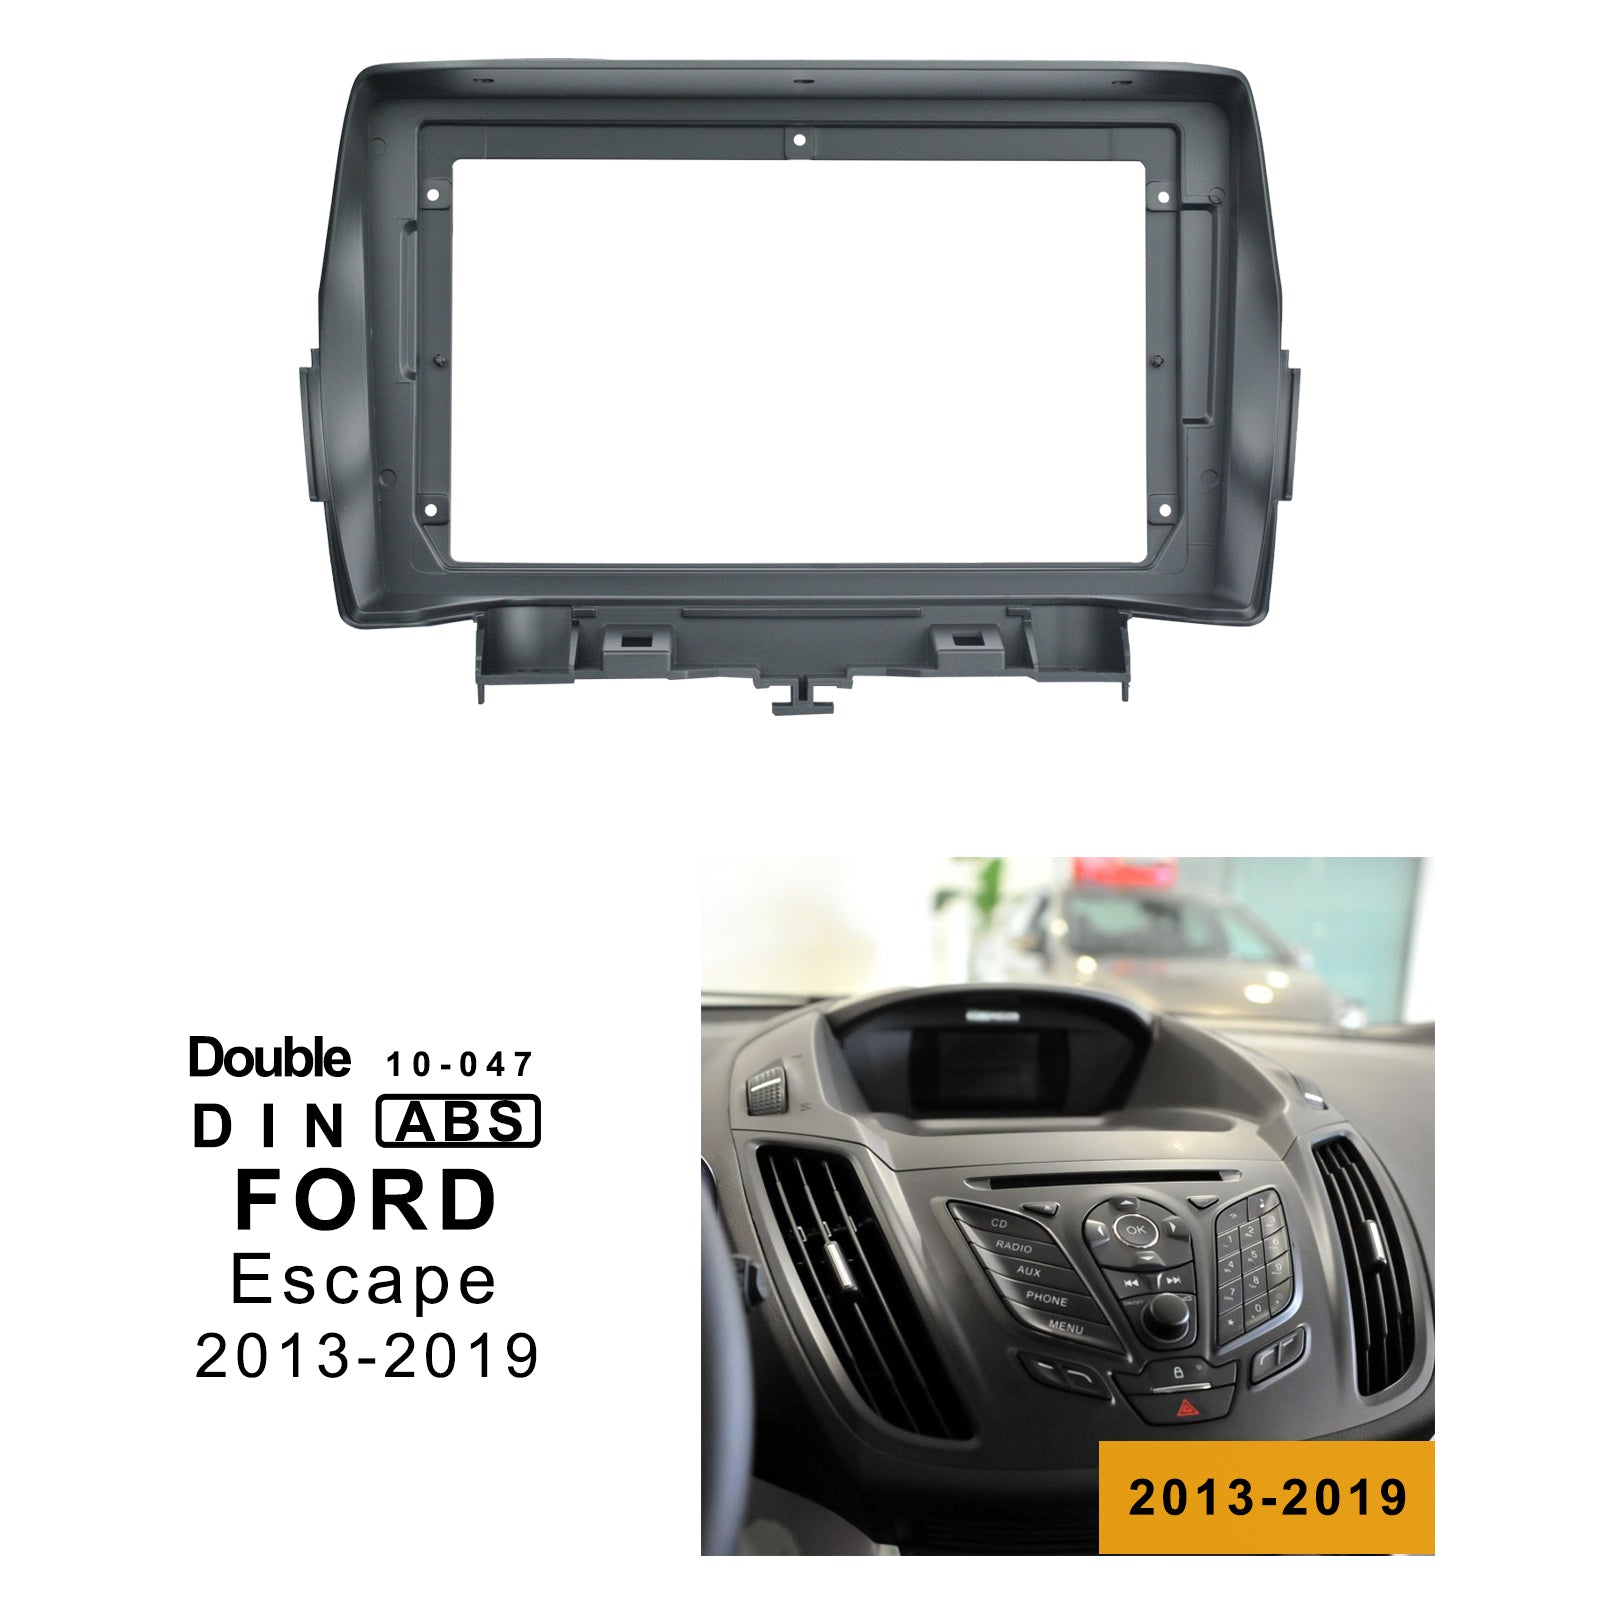 Car Radio In-Dash Mounting Frame Radio Installation Fascia for  FORD Kuga 2013-2019 with 9 inch Screen Car Stereo - lexxson official store